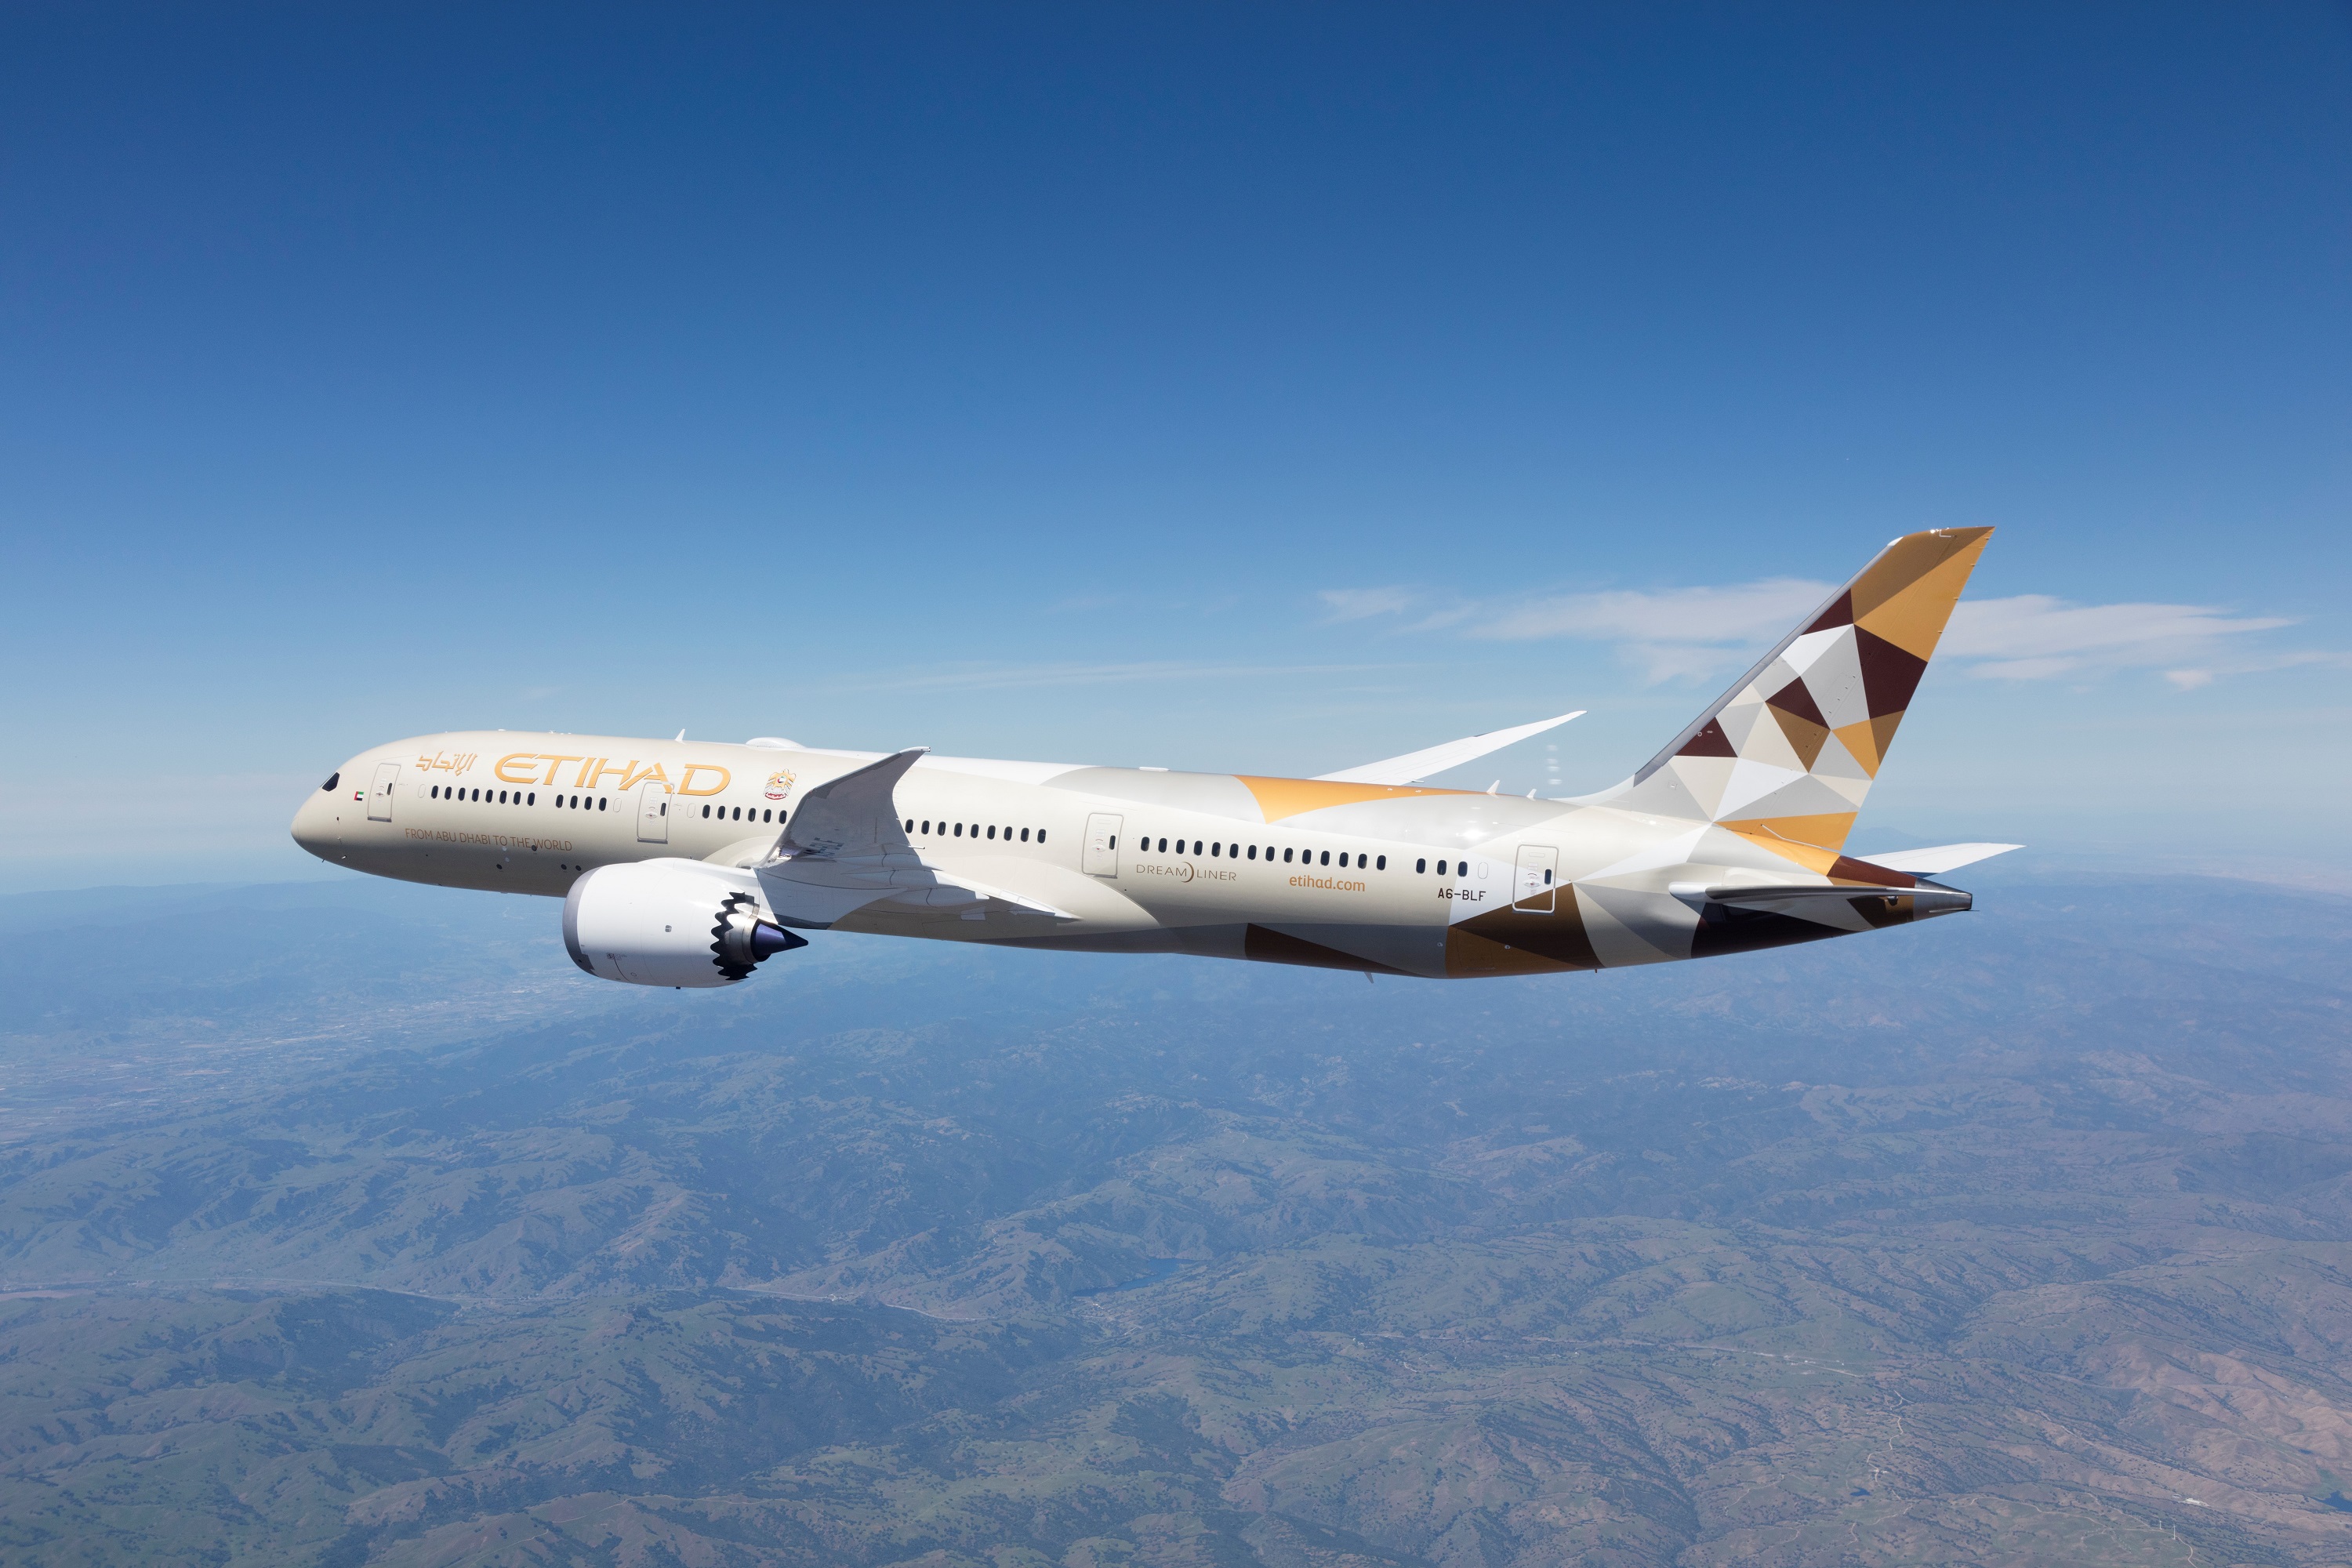 Etihad Airways To Offer Special Transfer Flights Connecting Key Cities On Its Global Network